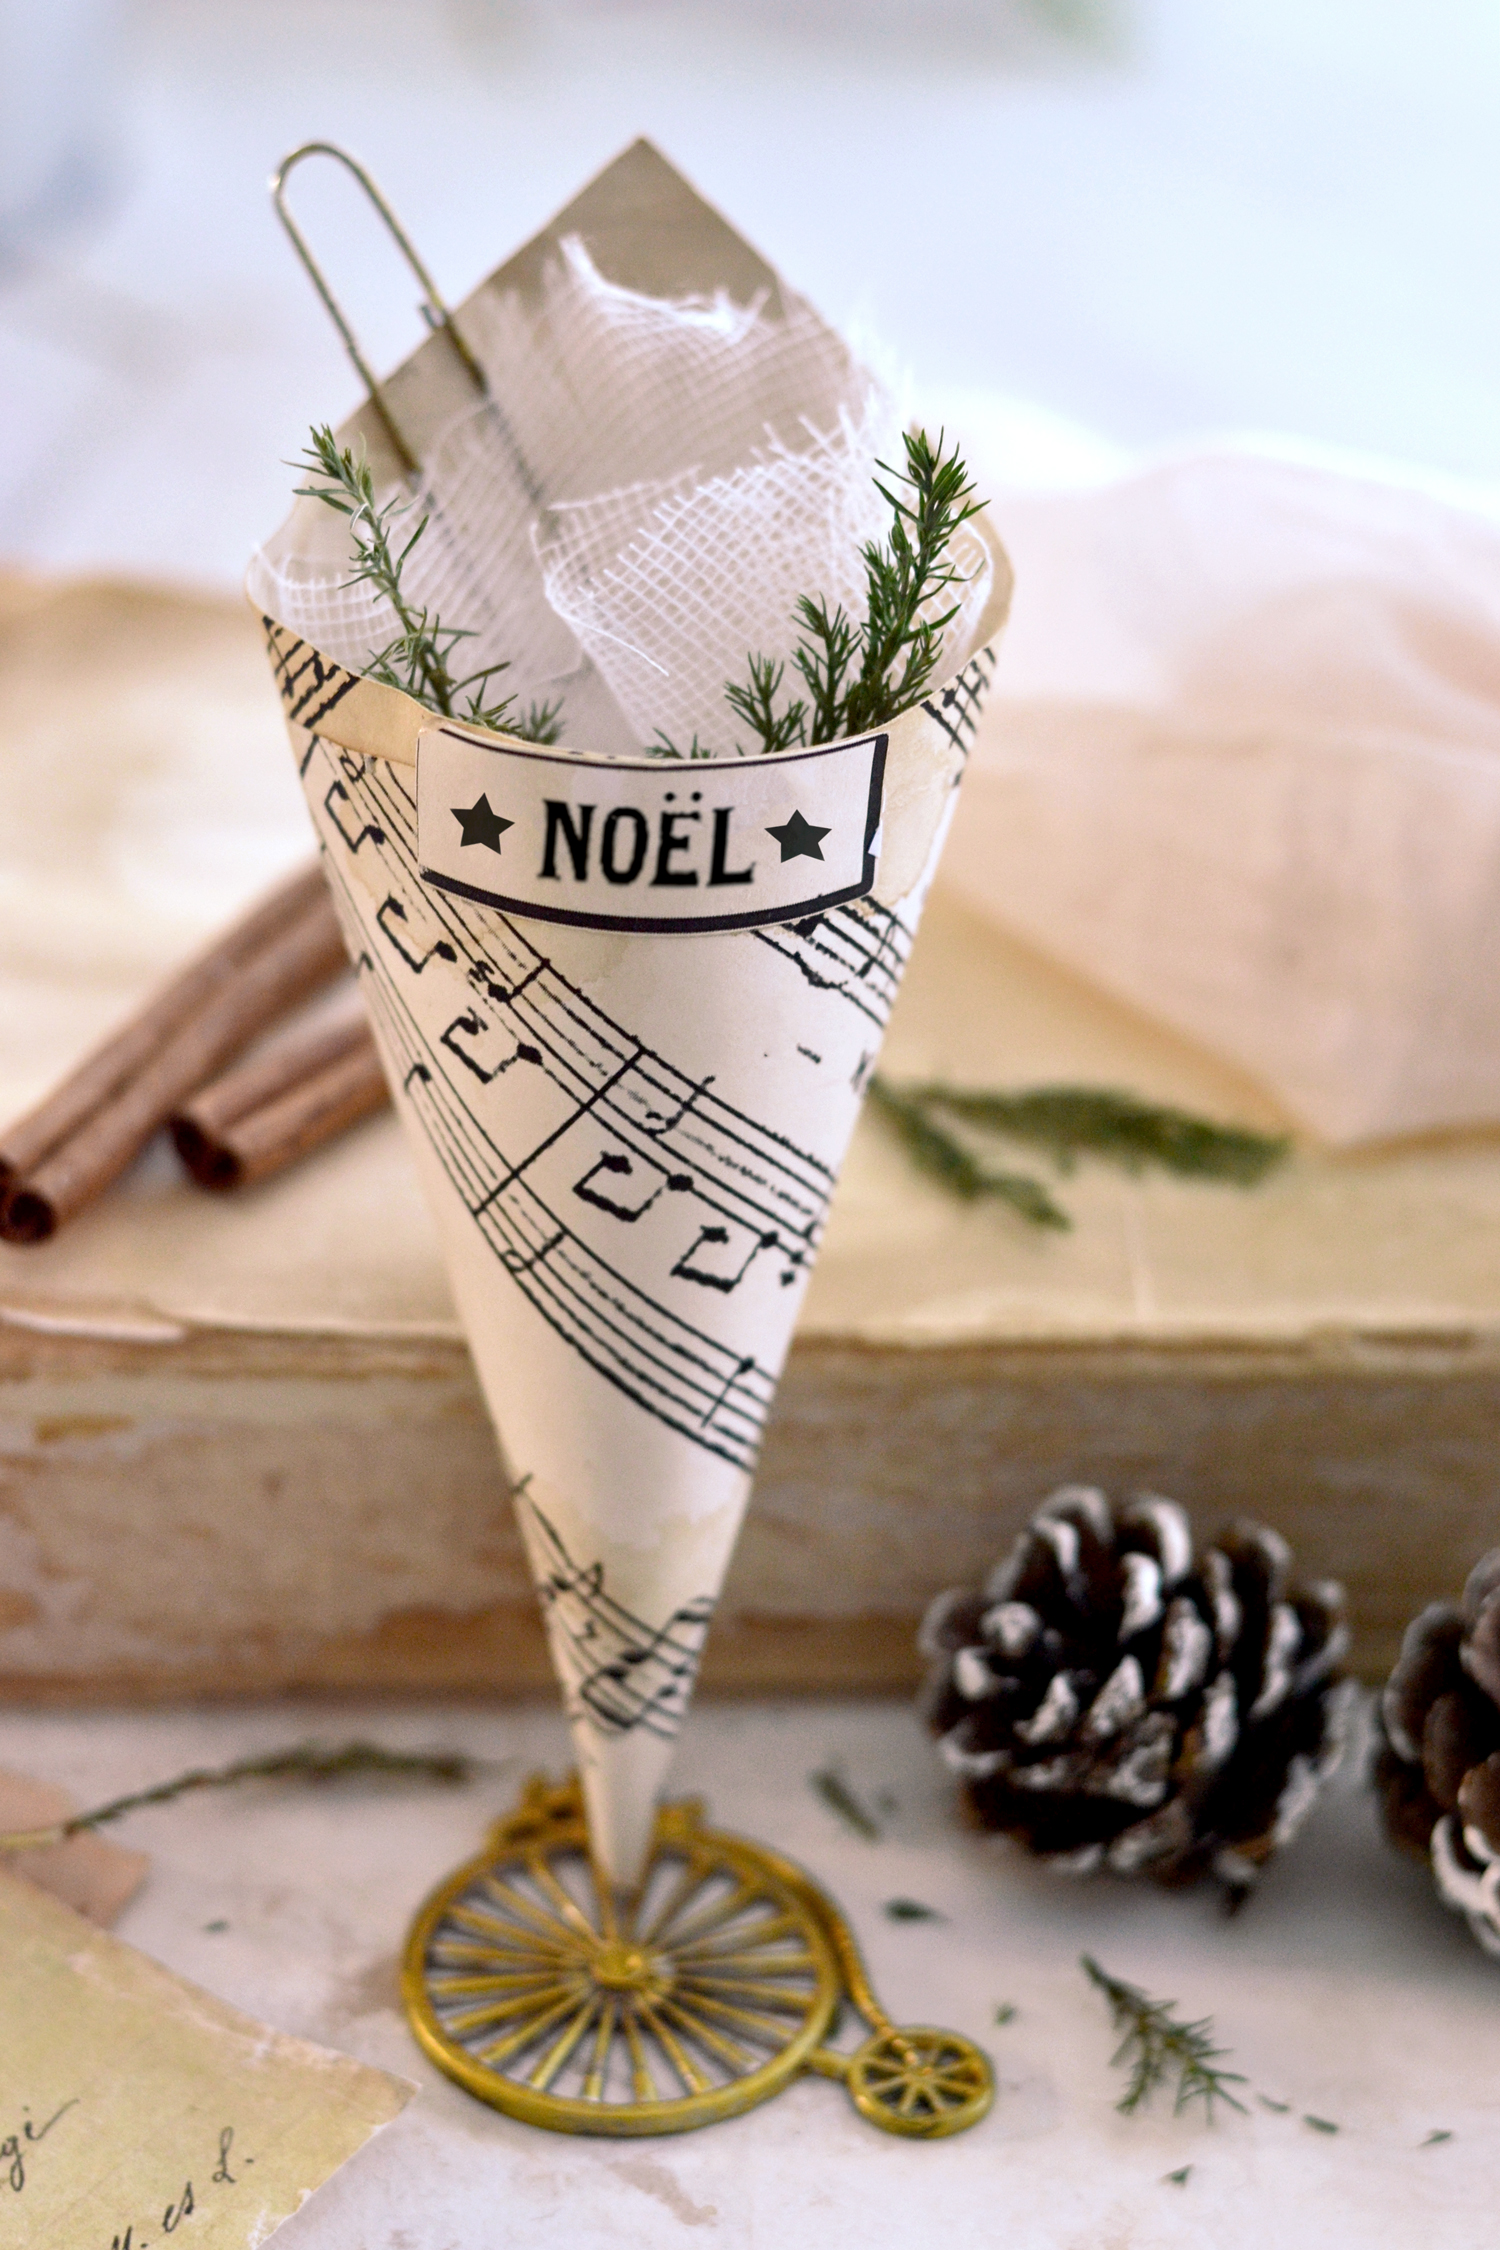 Vintage Christmas Paper cone placed against a vintage book